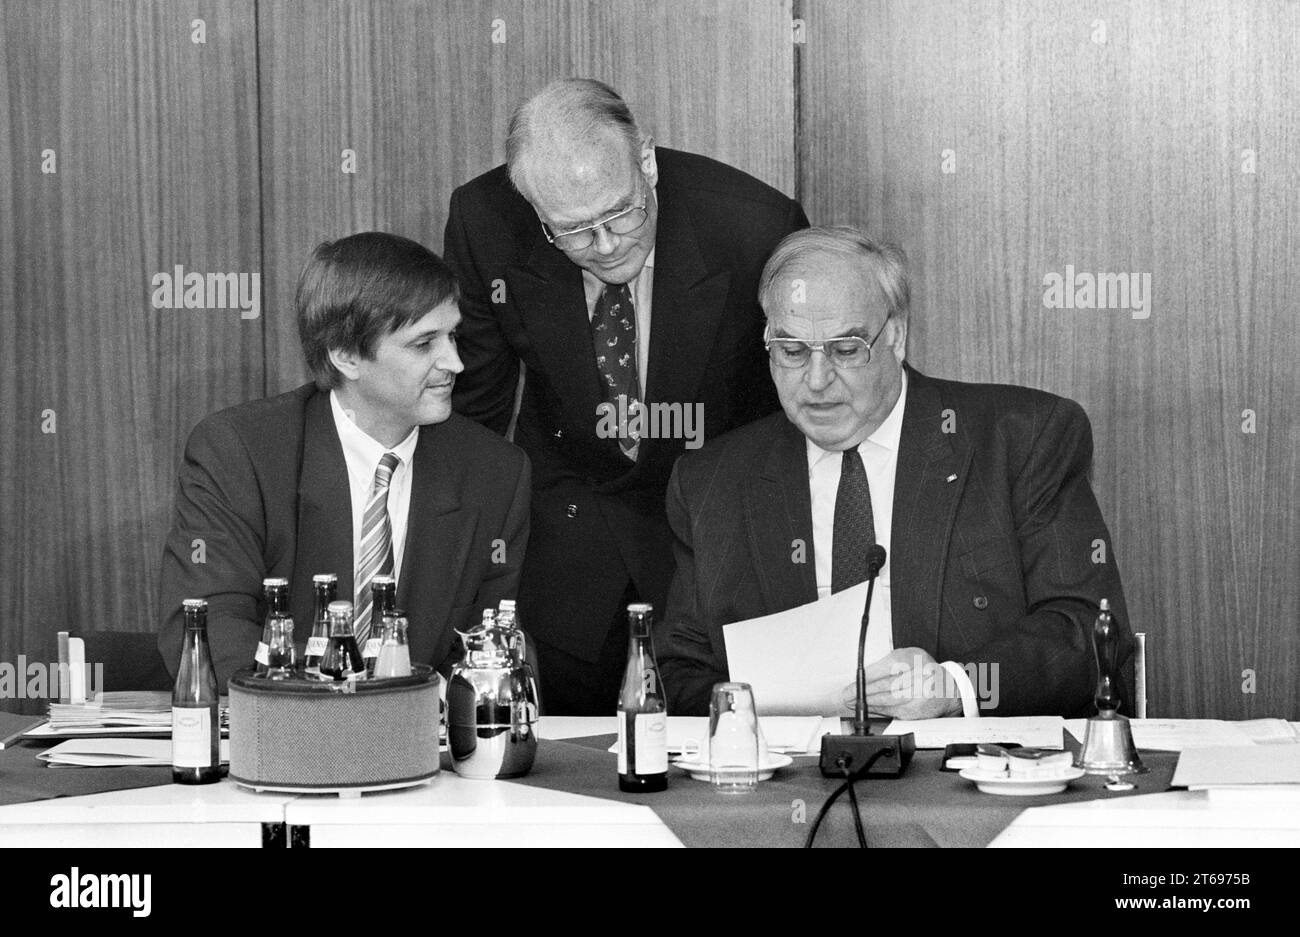 Germany, Bonn, 03.05.1993 Archive: 40-10-21 CDU Federal Executive Committee Meeting Photo: CDU Federal Chairman Helmut Kohl talking with Peter Hintze, CDU Secretary General and Ottfried Hennig (center), CDU State Chairman of Schleswig-Holstein [automated translation] Stock Photo